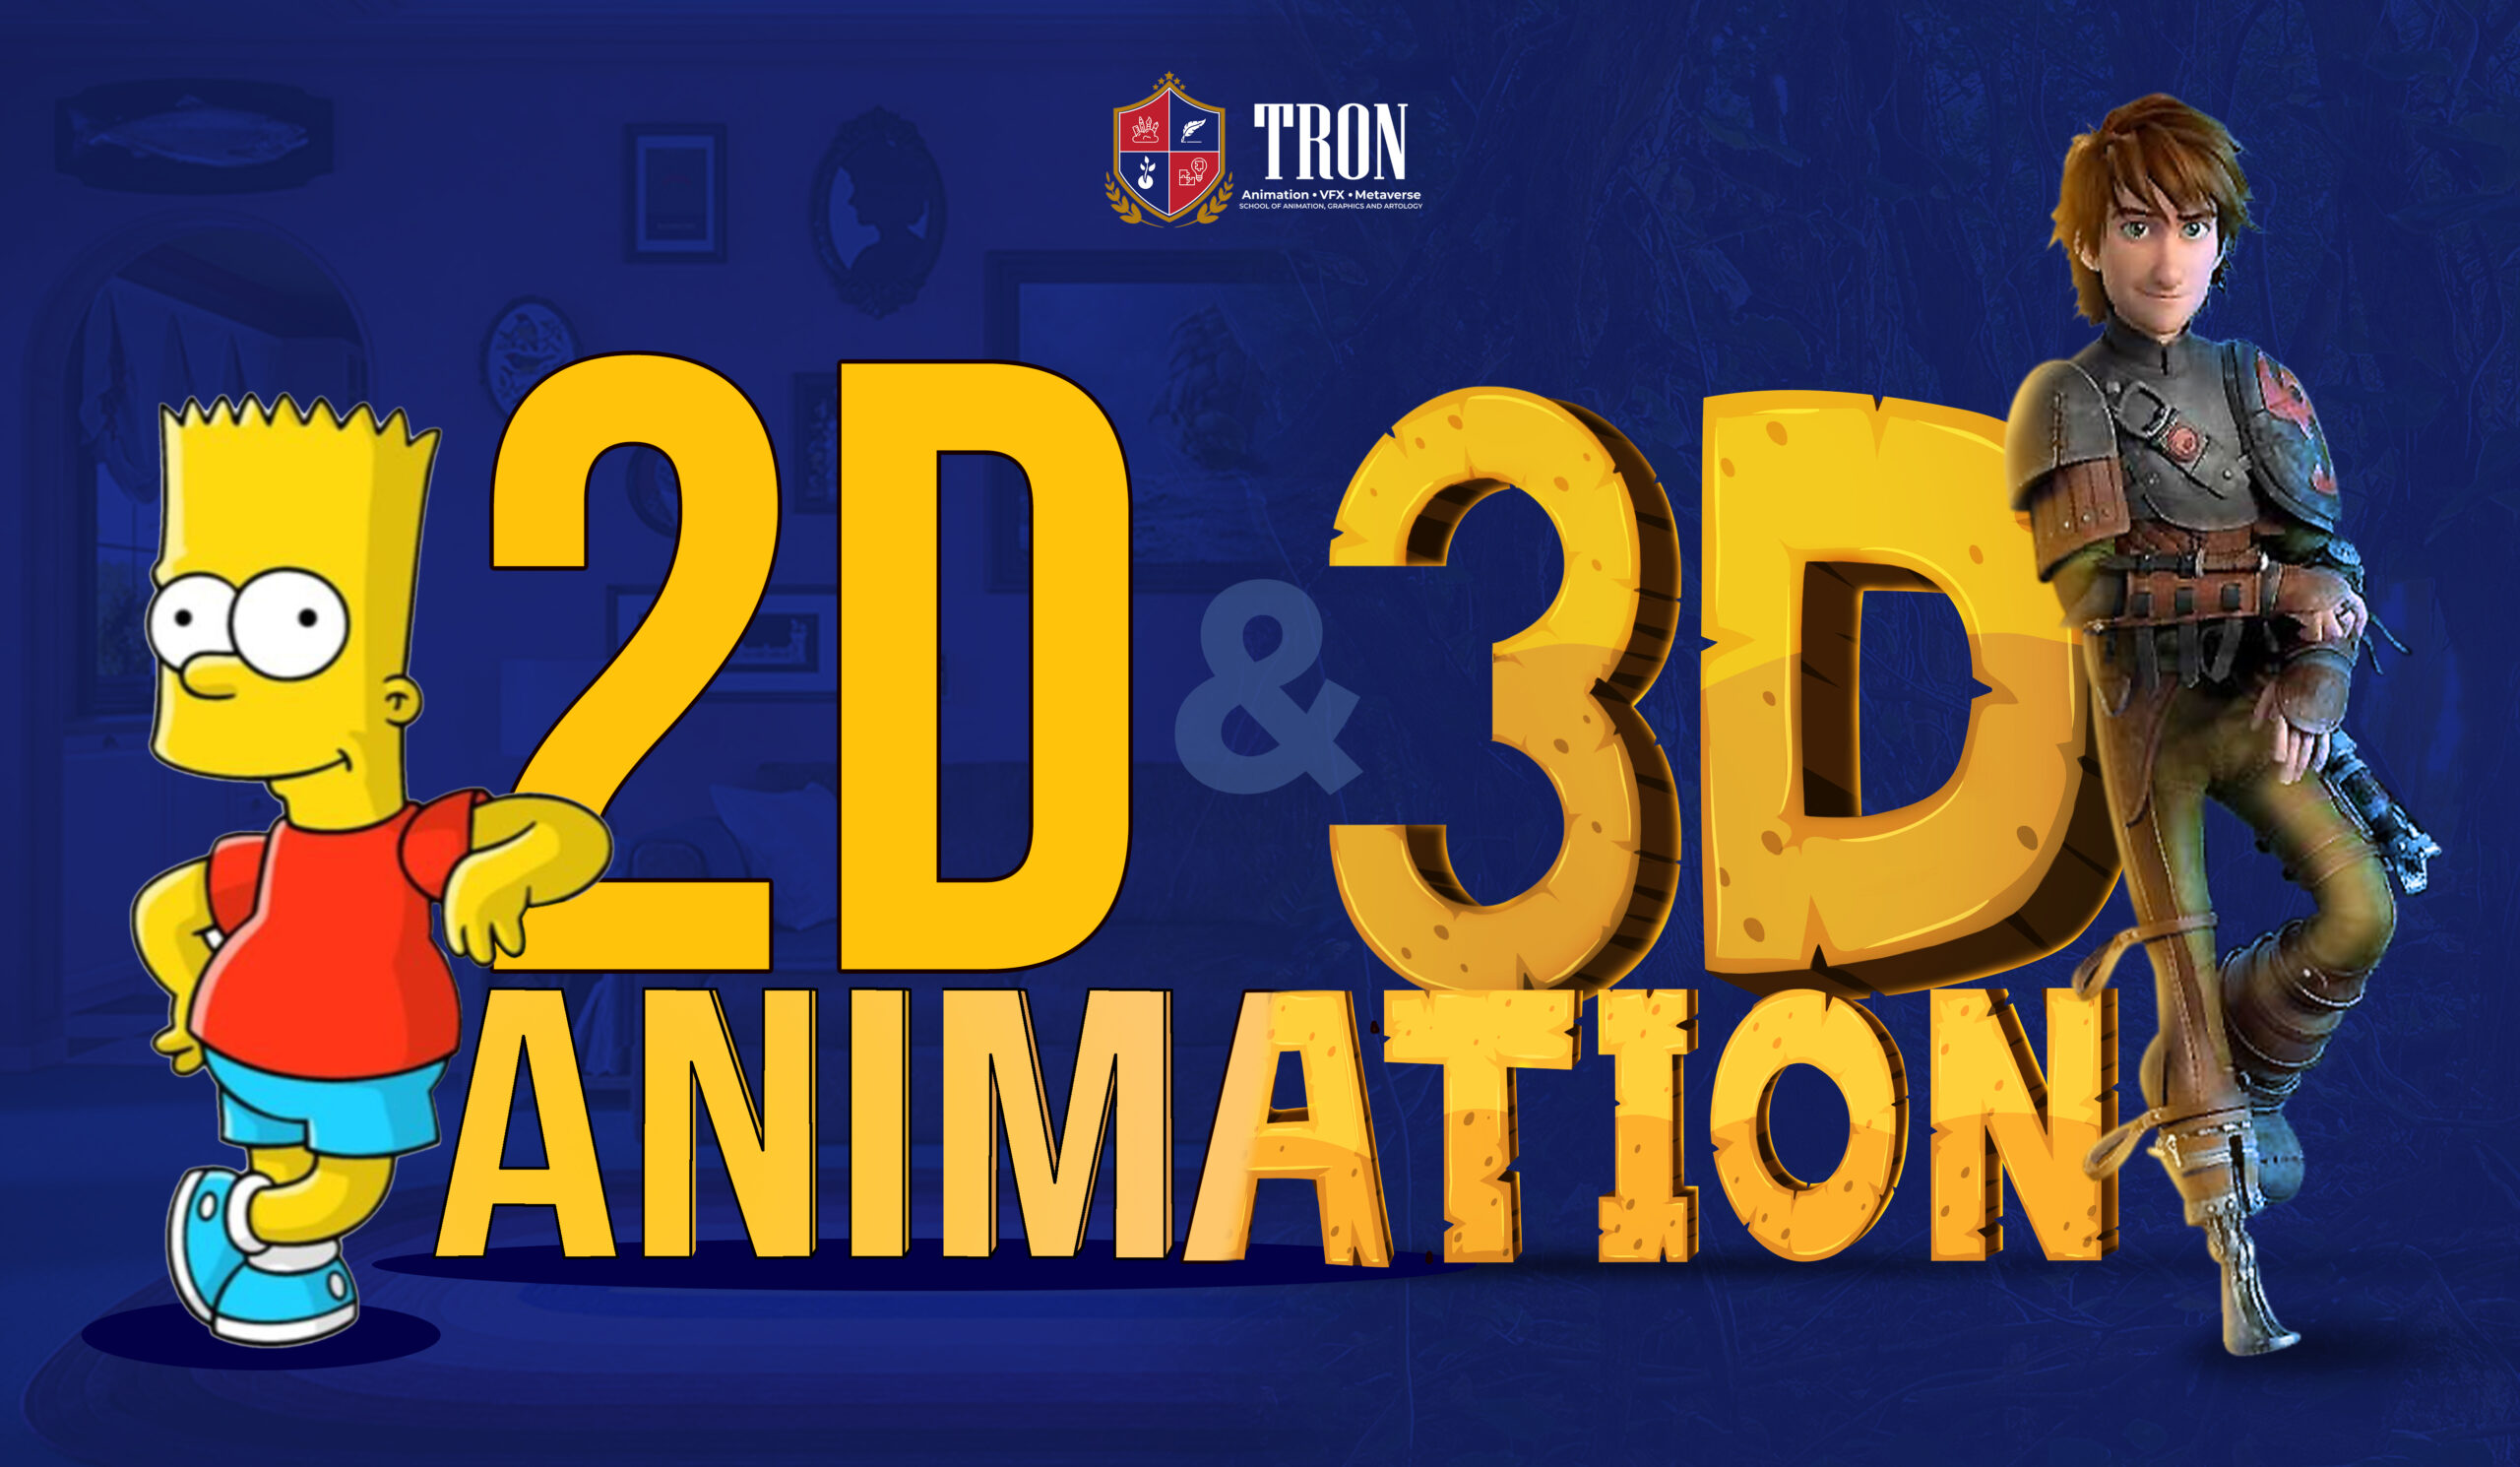 2d and 3d animation